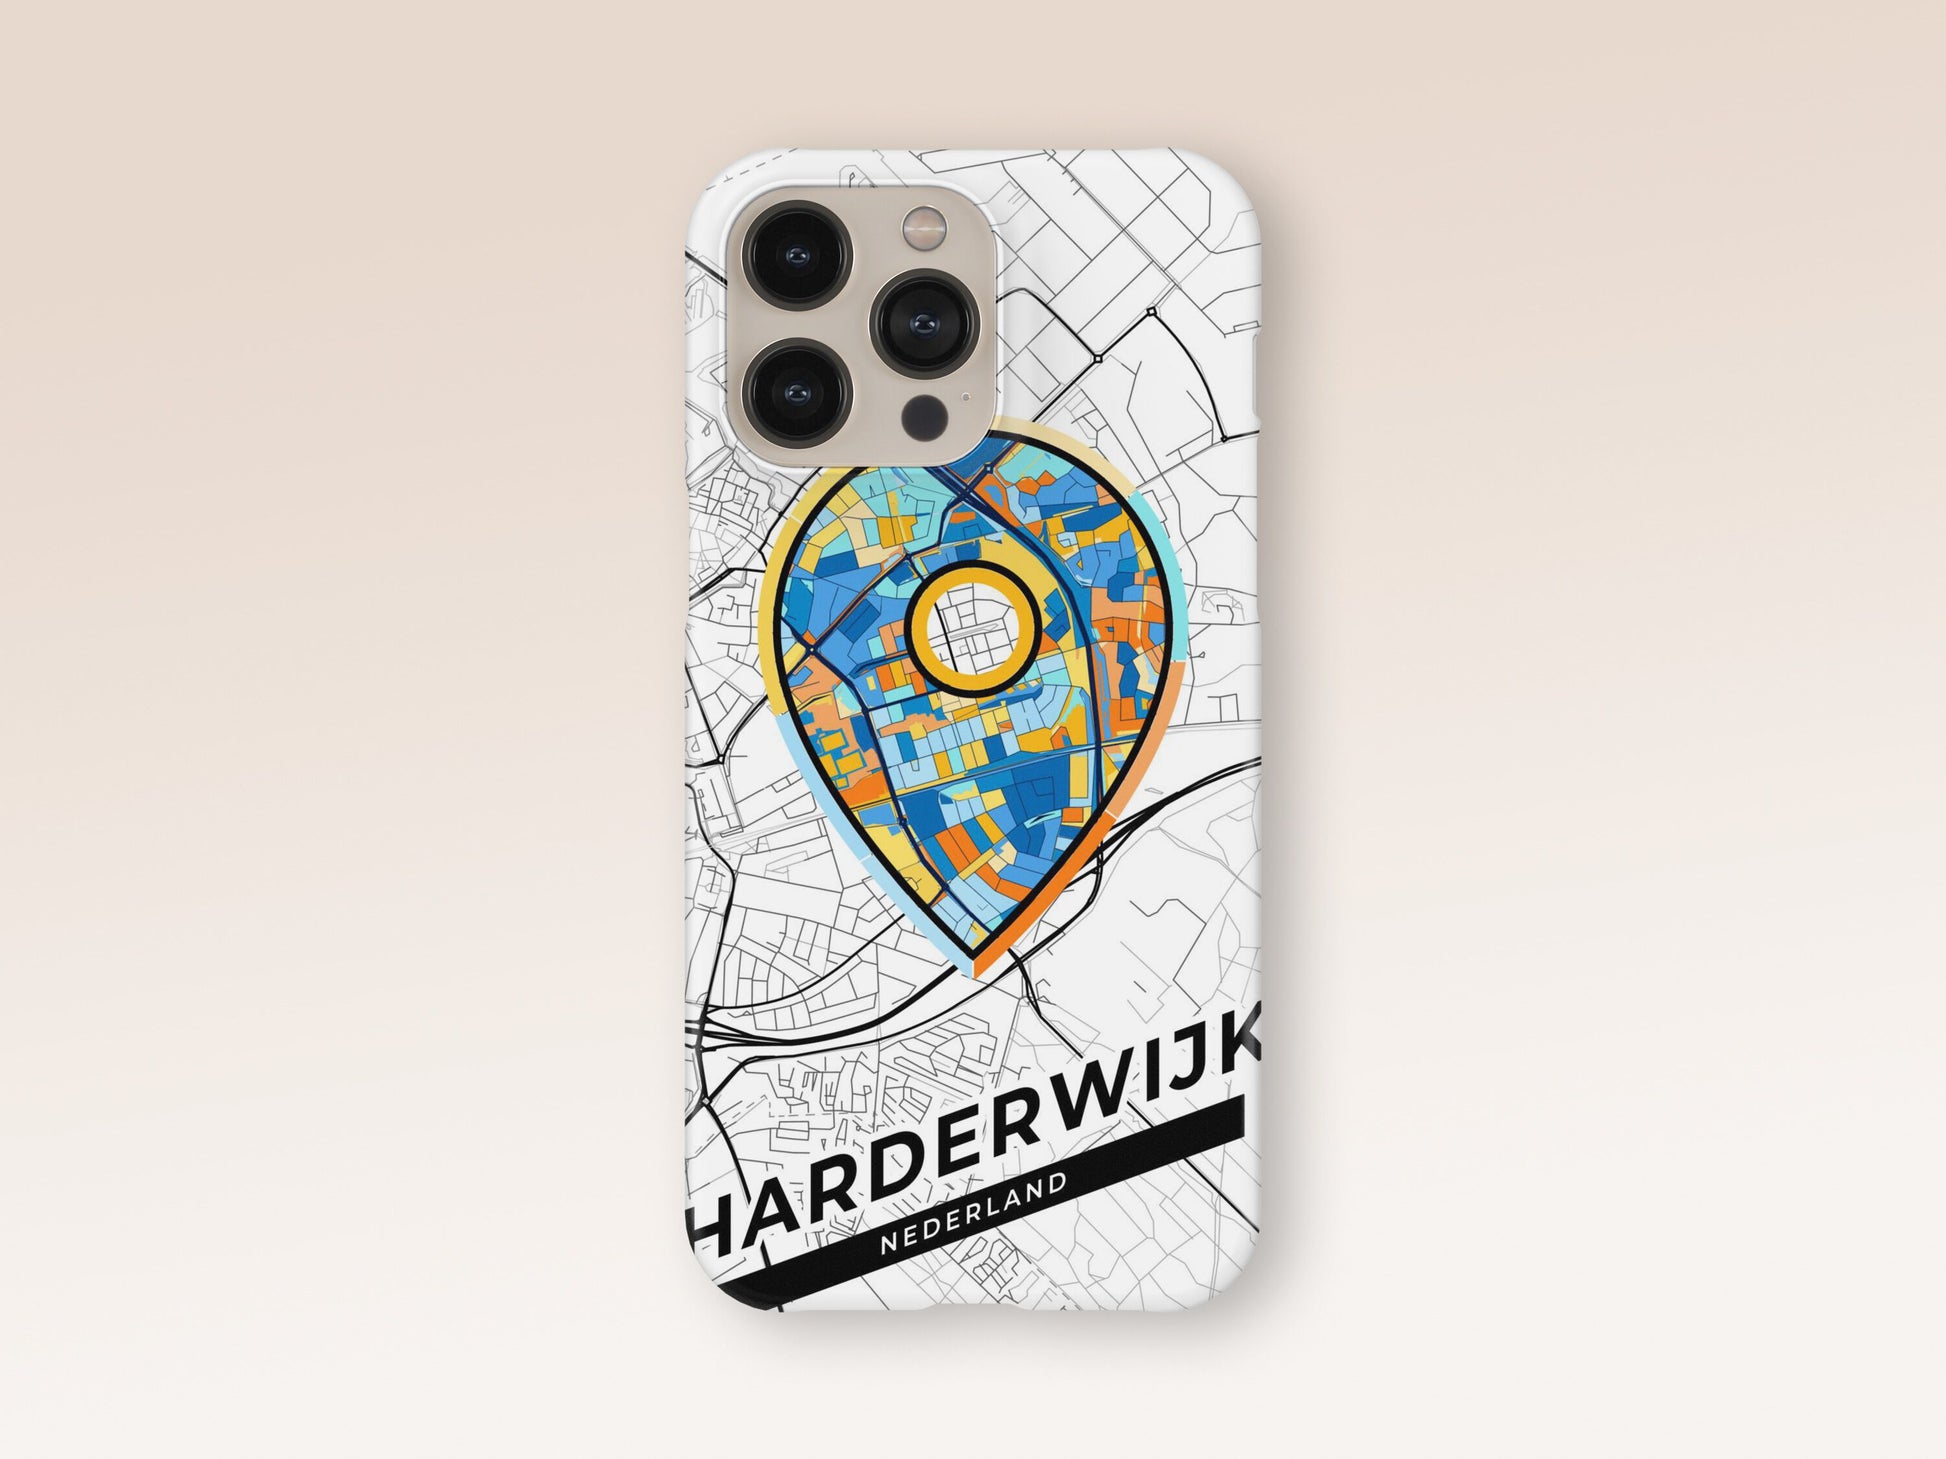 Harderwijk Netherlands slim phone case with colorful icon. Birthday, wedding or housewarming gift. Couple match cases. 1